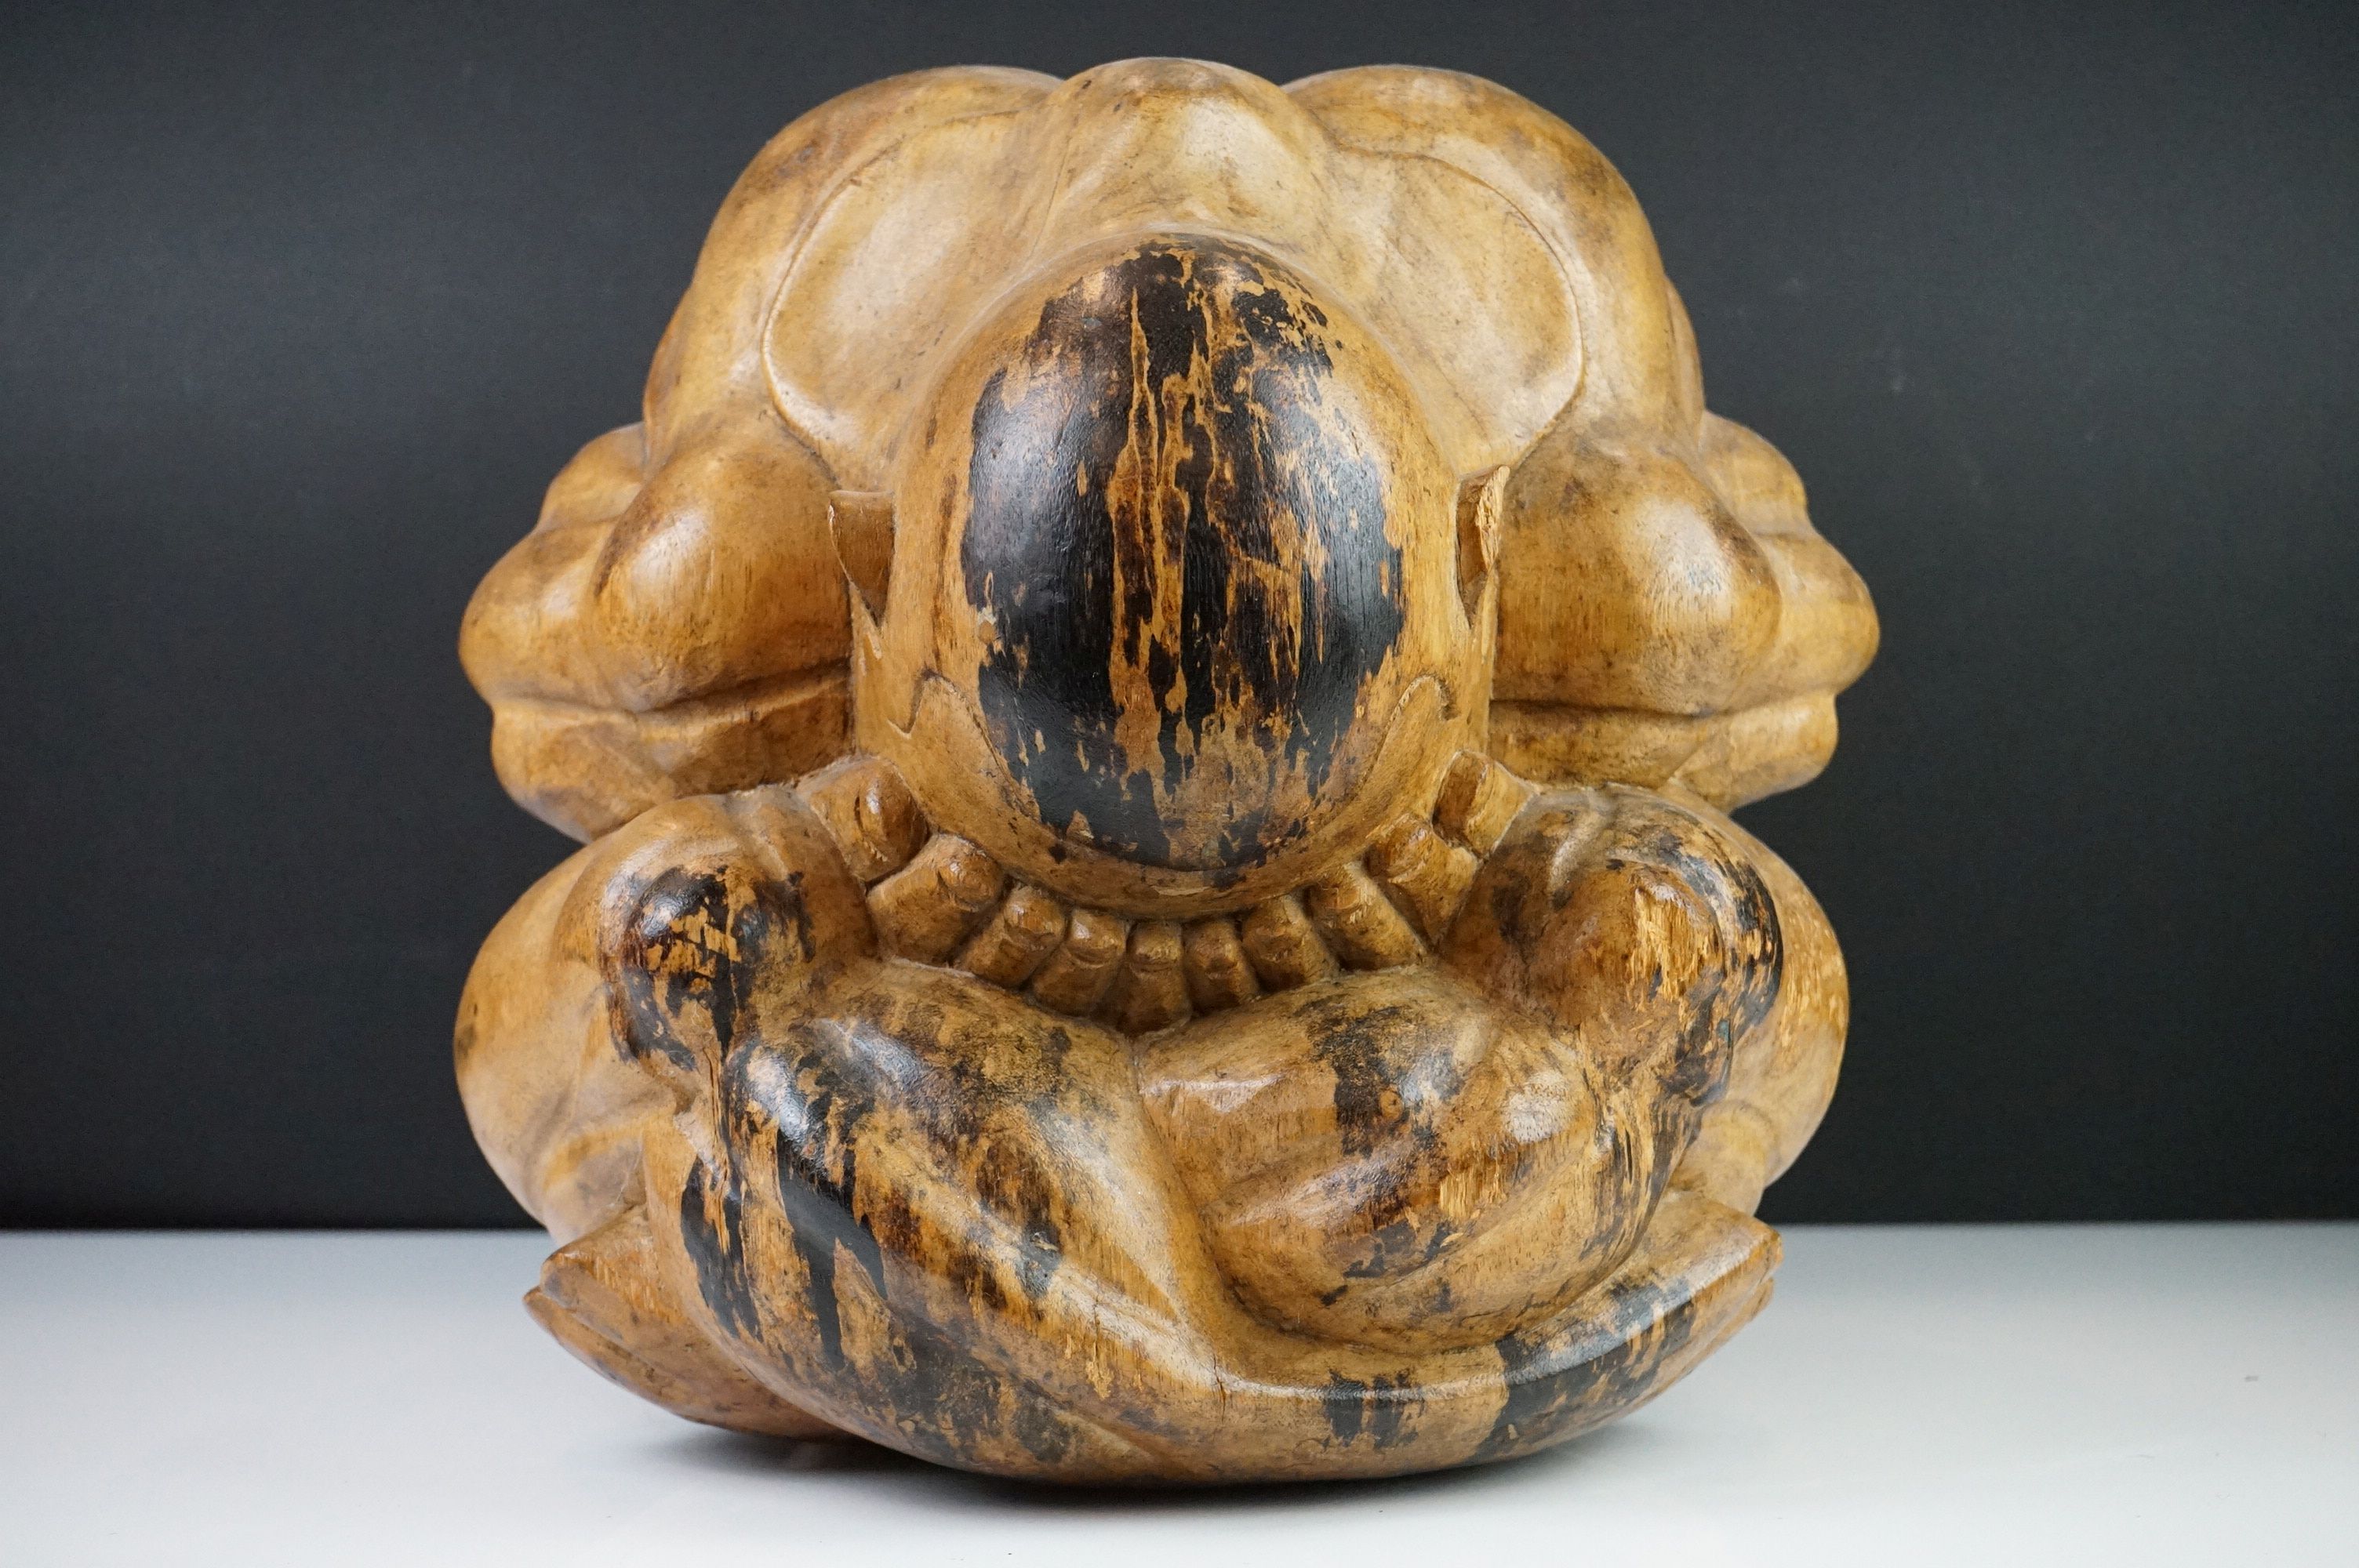 Carved Wooden Sculpture of a Seated Man with his head in his lap, 30cm high x 31cm wide - Image 7 of 8